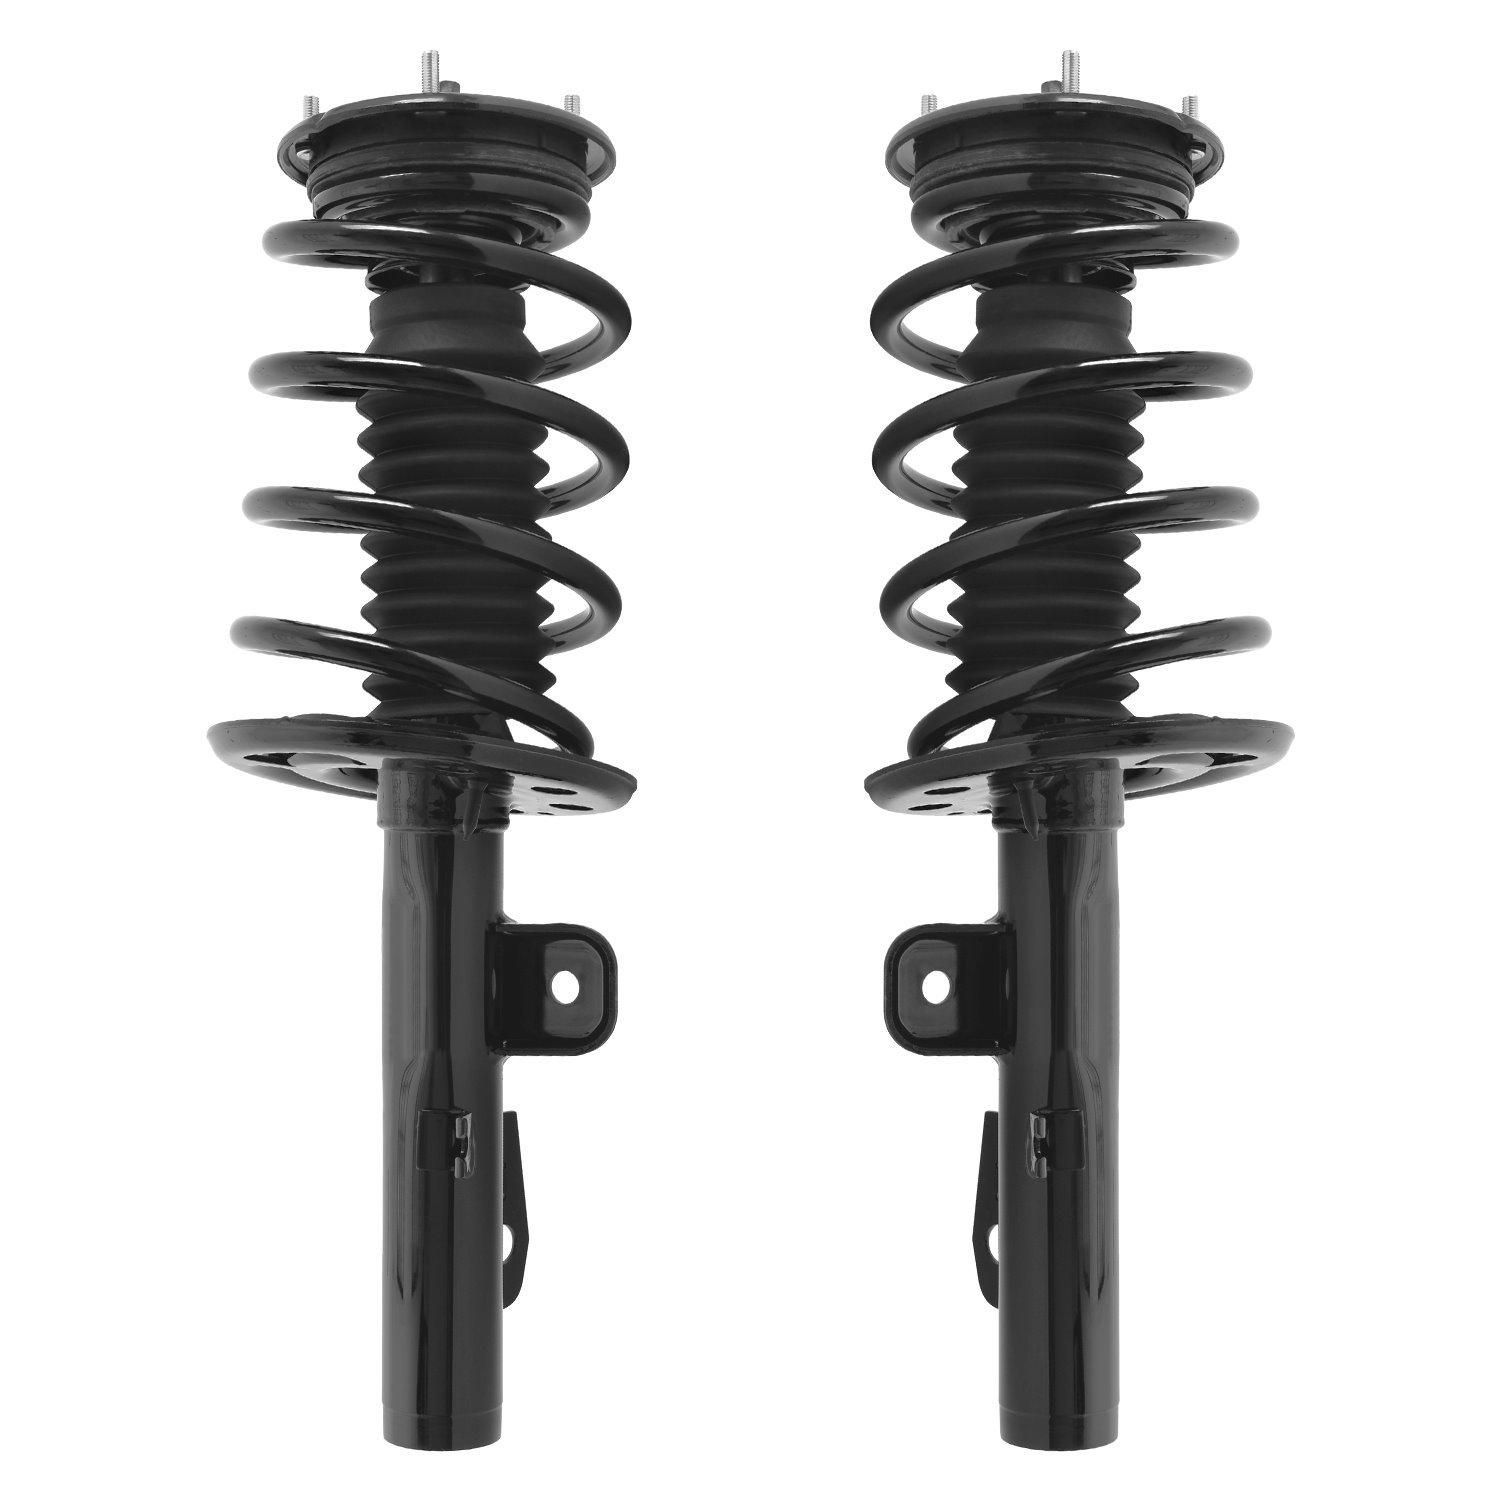 2-11545-11546-001 Suspension Strut & Coil Spring Assembly Set Fits Select Ford Taurus